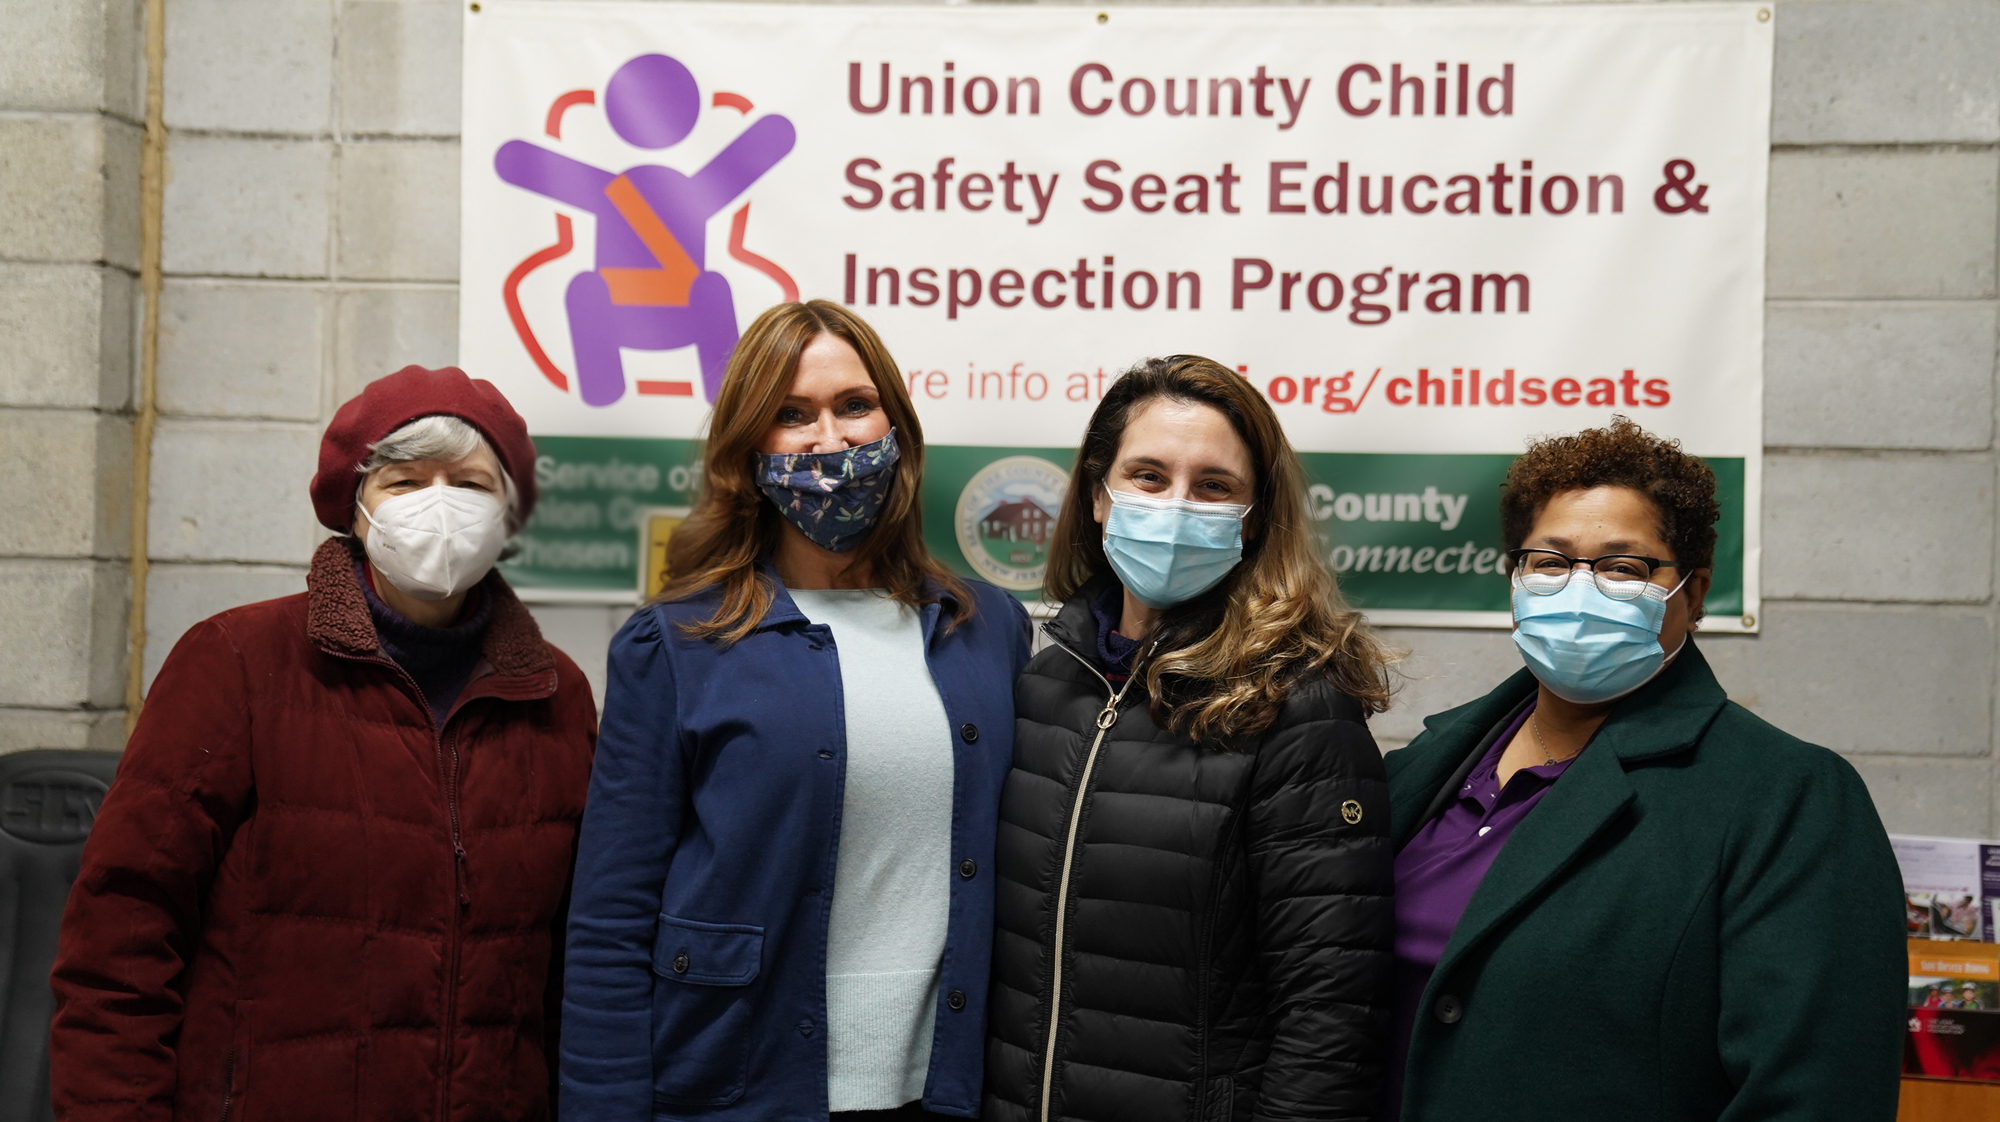 Commissioner Chair Rebecca Williams and Commissioners Kimberly Palmieri-Mouded, commissioner Bette Jane Kowalski, and Education Program Coordinator Christine Marcantonio standing for a photo